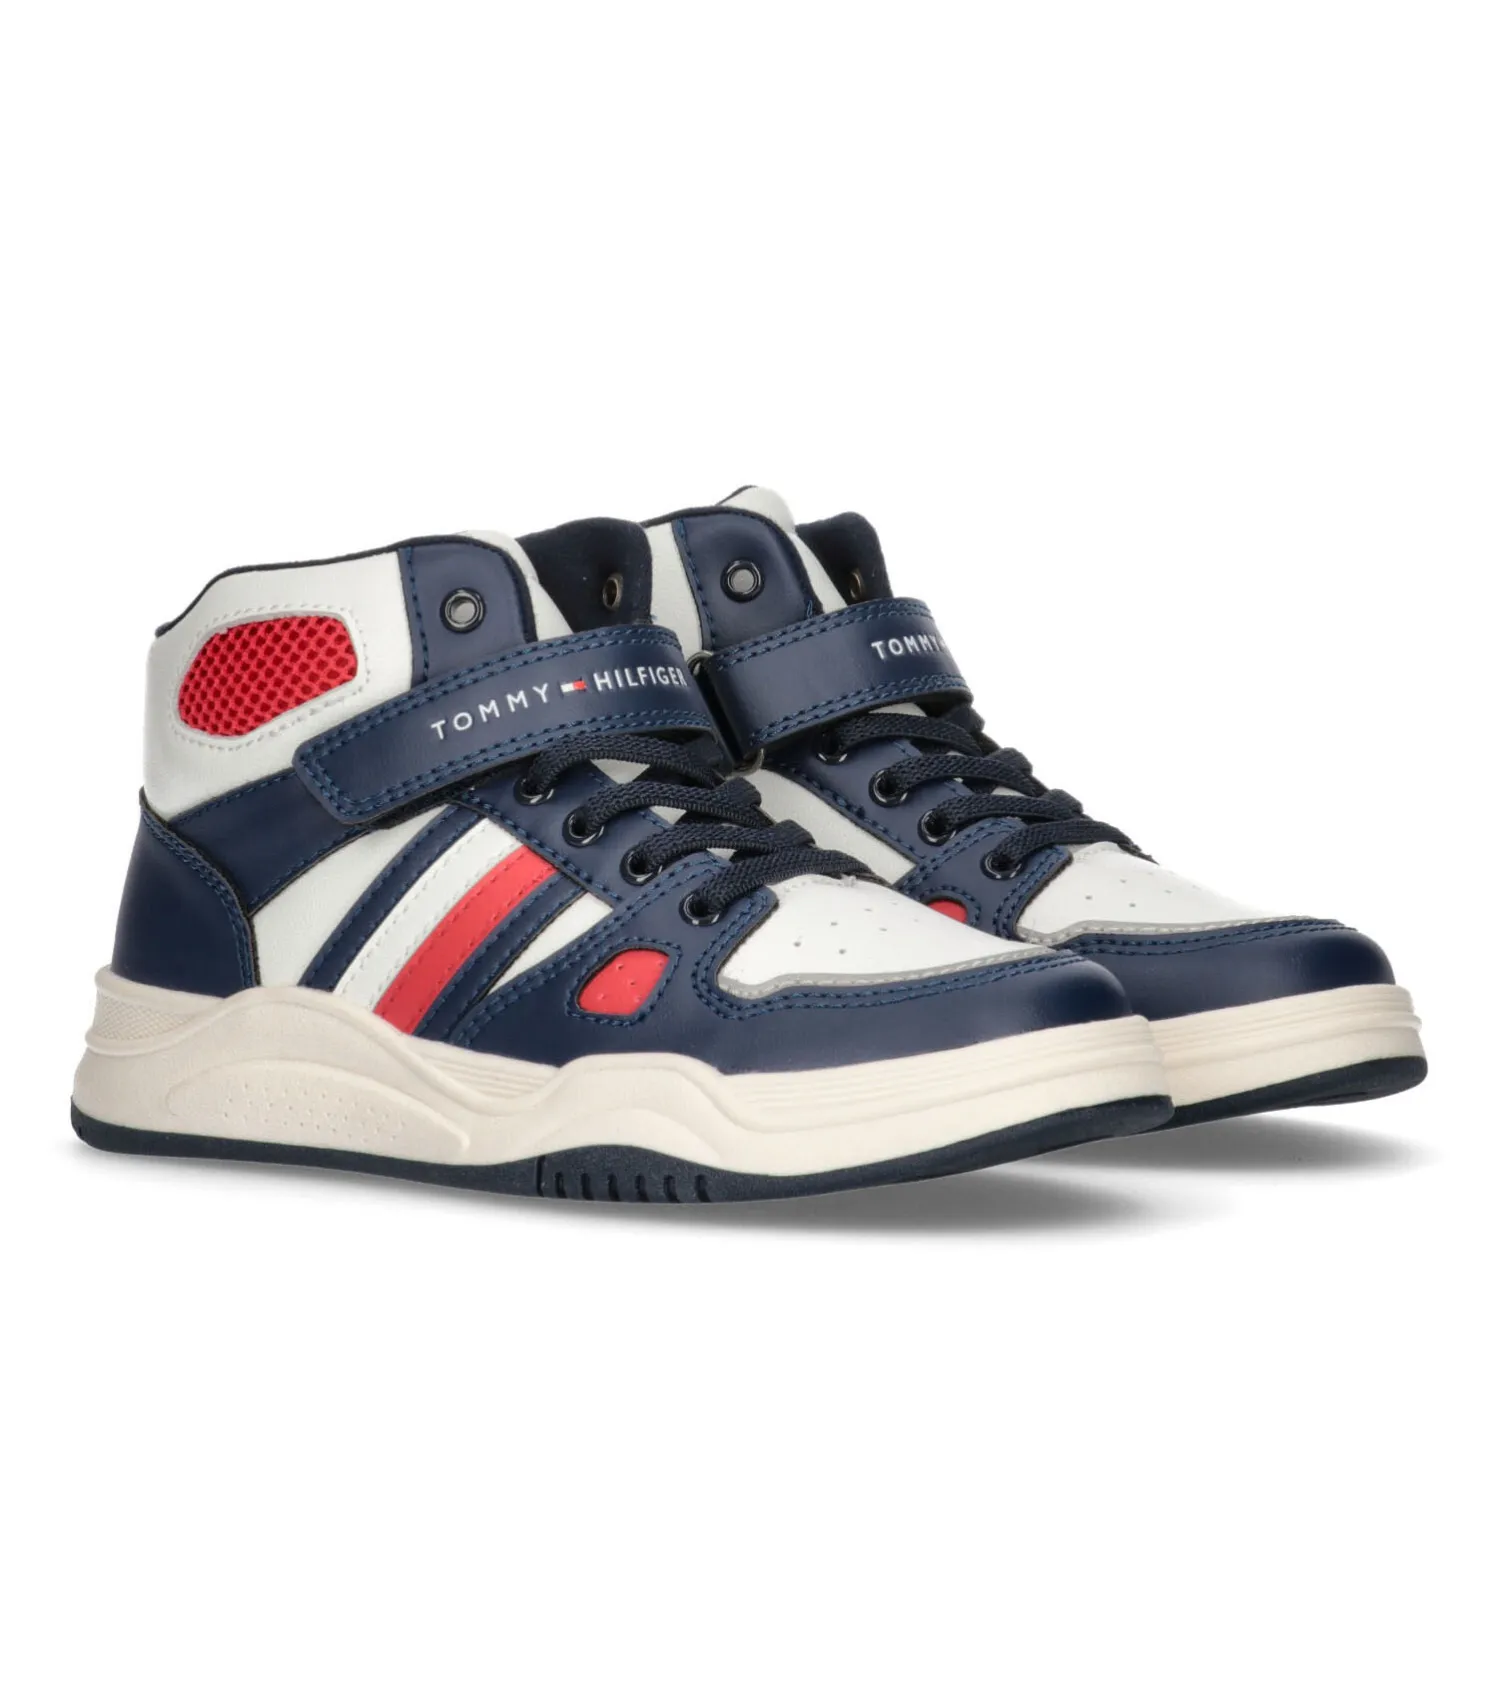 | - Sneakers Boys Blue/Off Stripes HILFIGER up/Velcro White/Red High TOMMY Top Choice+Attitude Lace